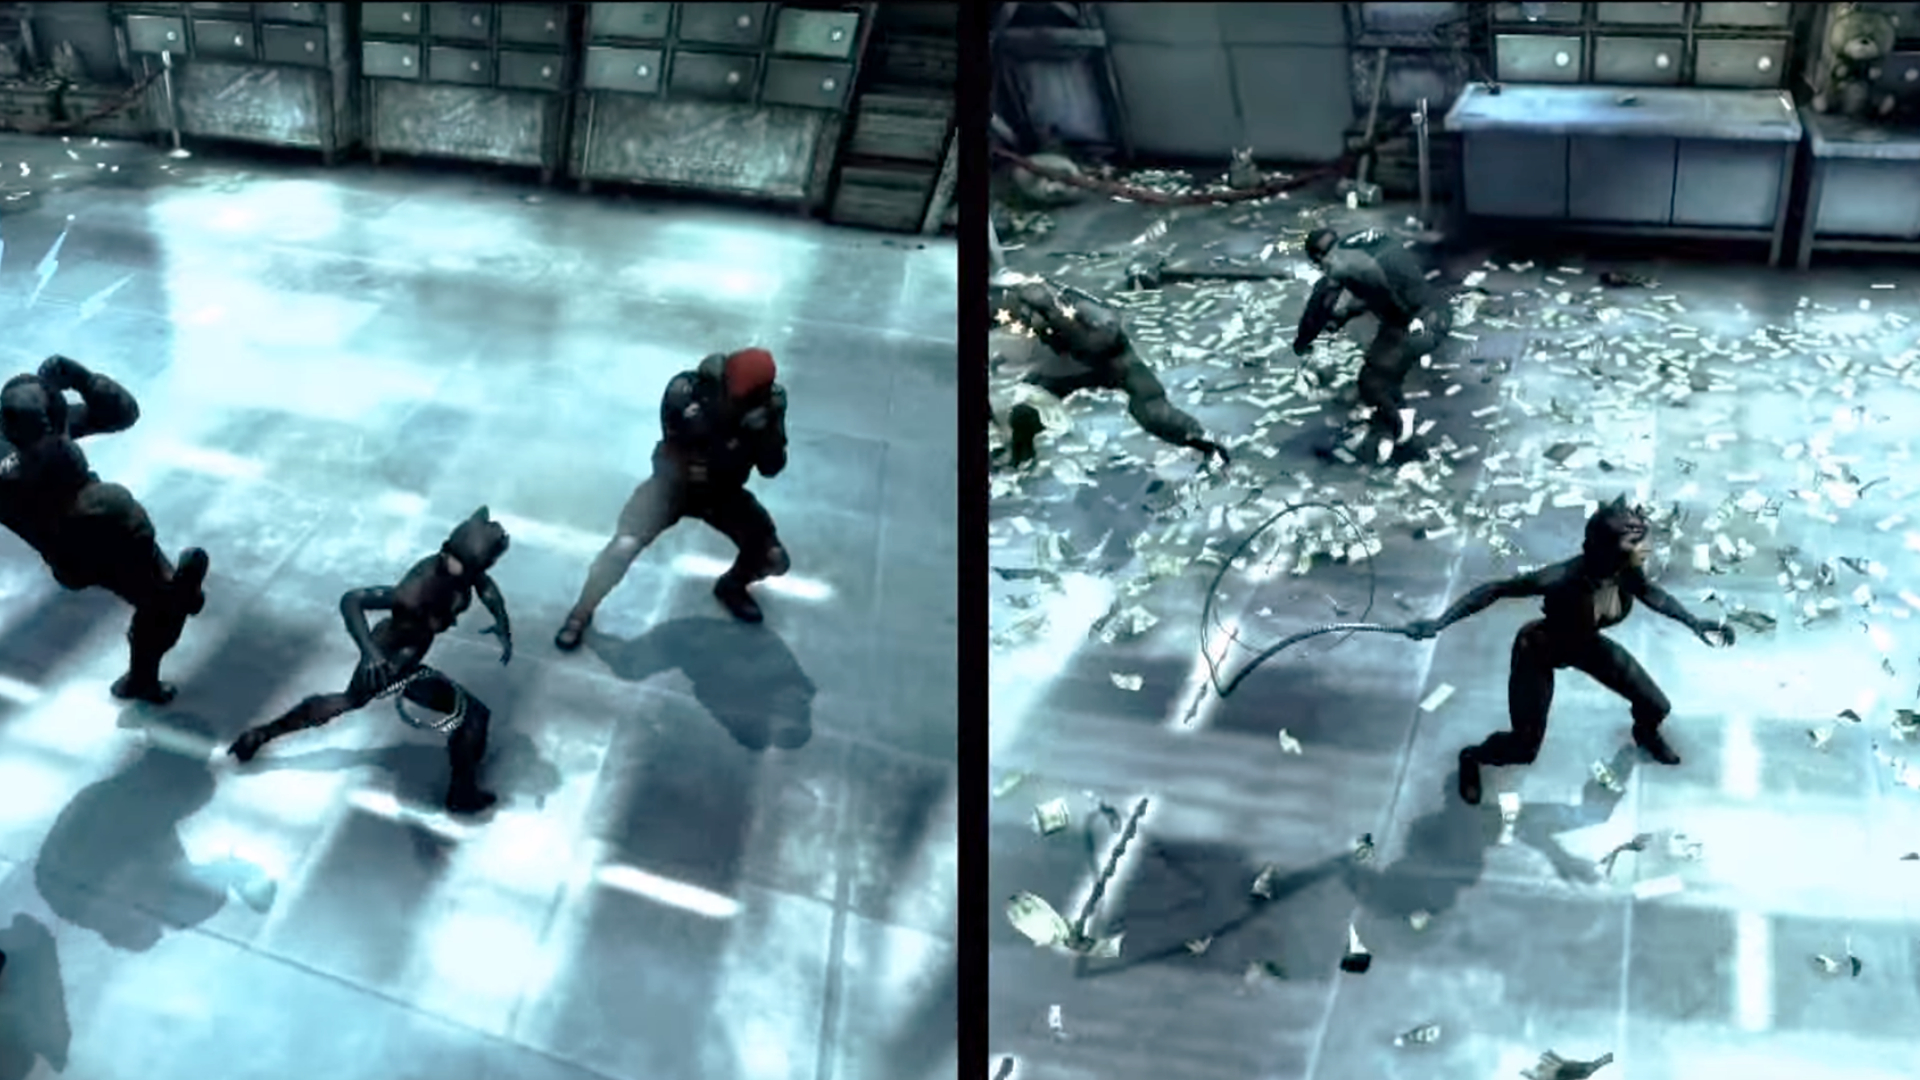 PhysX comparison, turned off on the left.